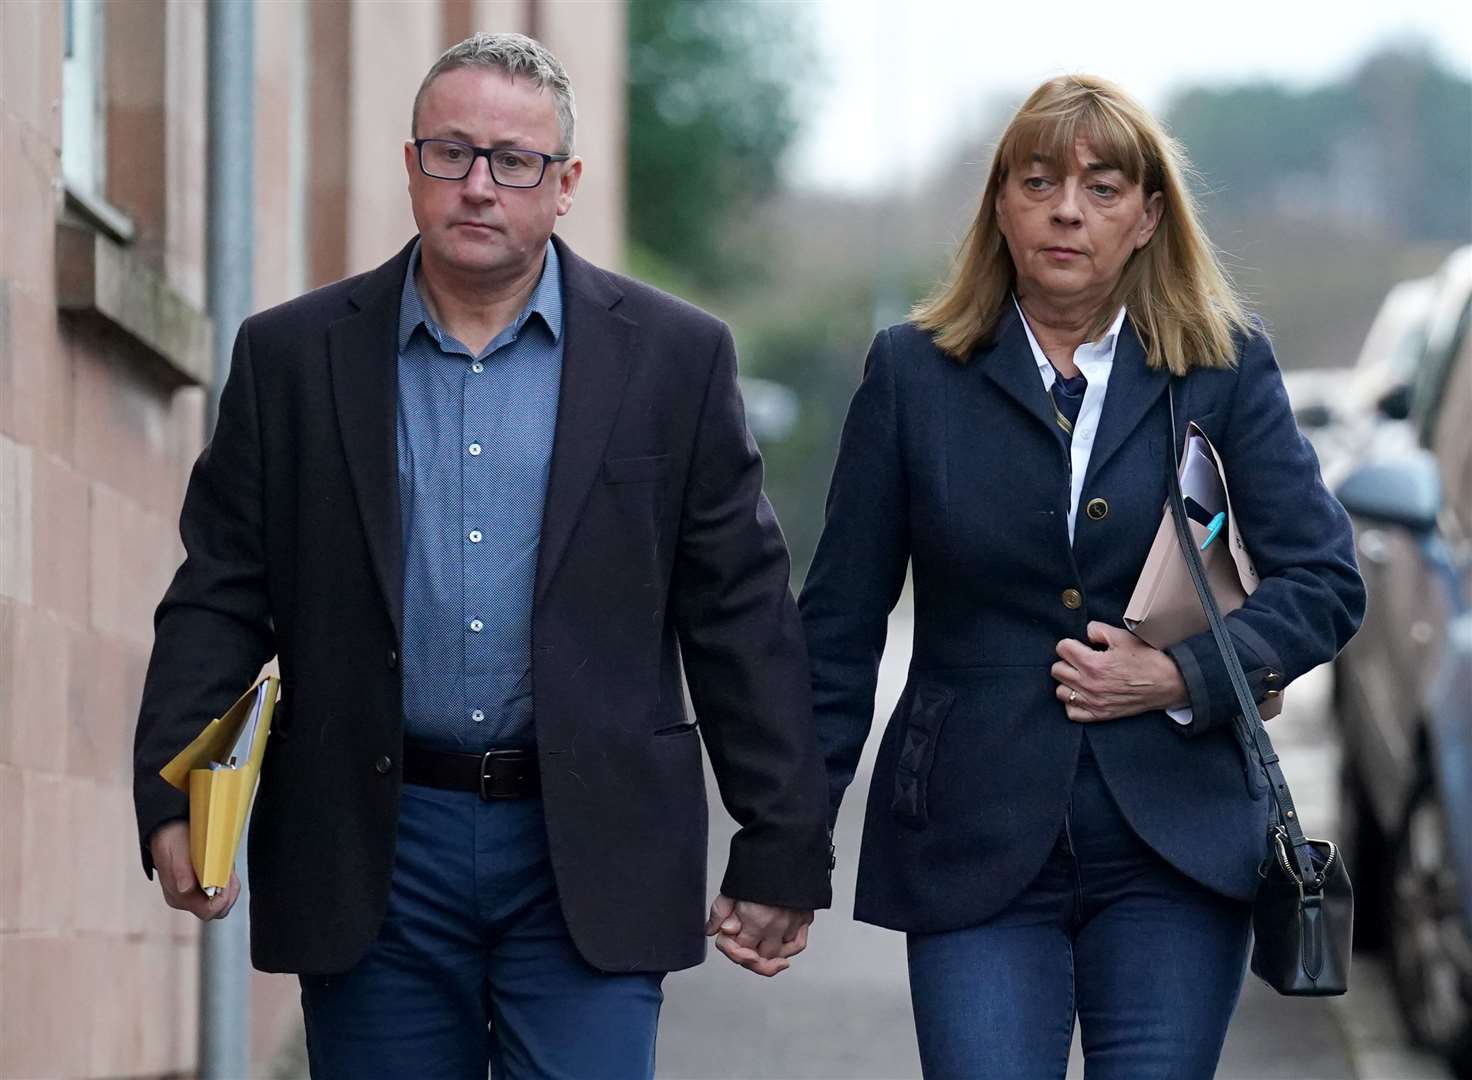 Linda and Stuart Allan, the parents of Katie Allan, arrive at the inquiry (Andrew Milligan/PA)